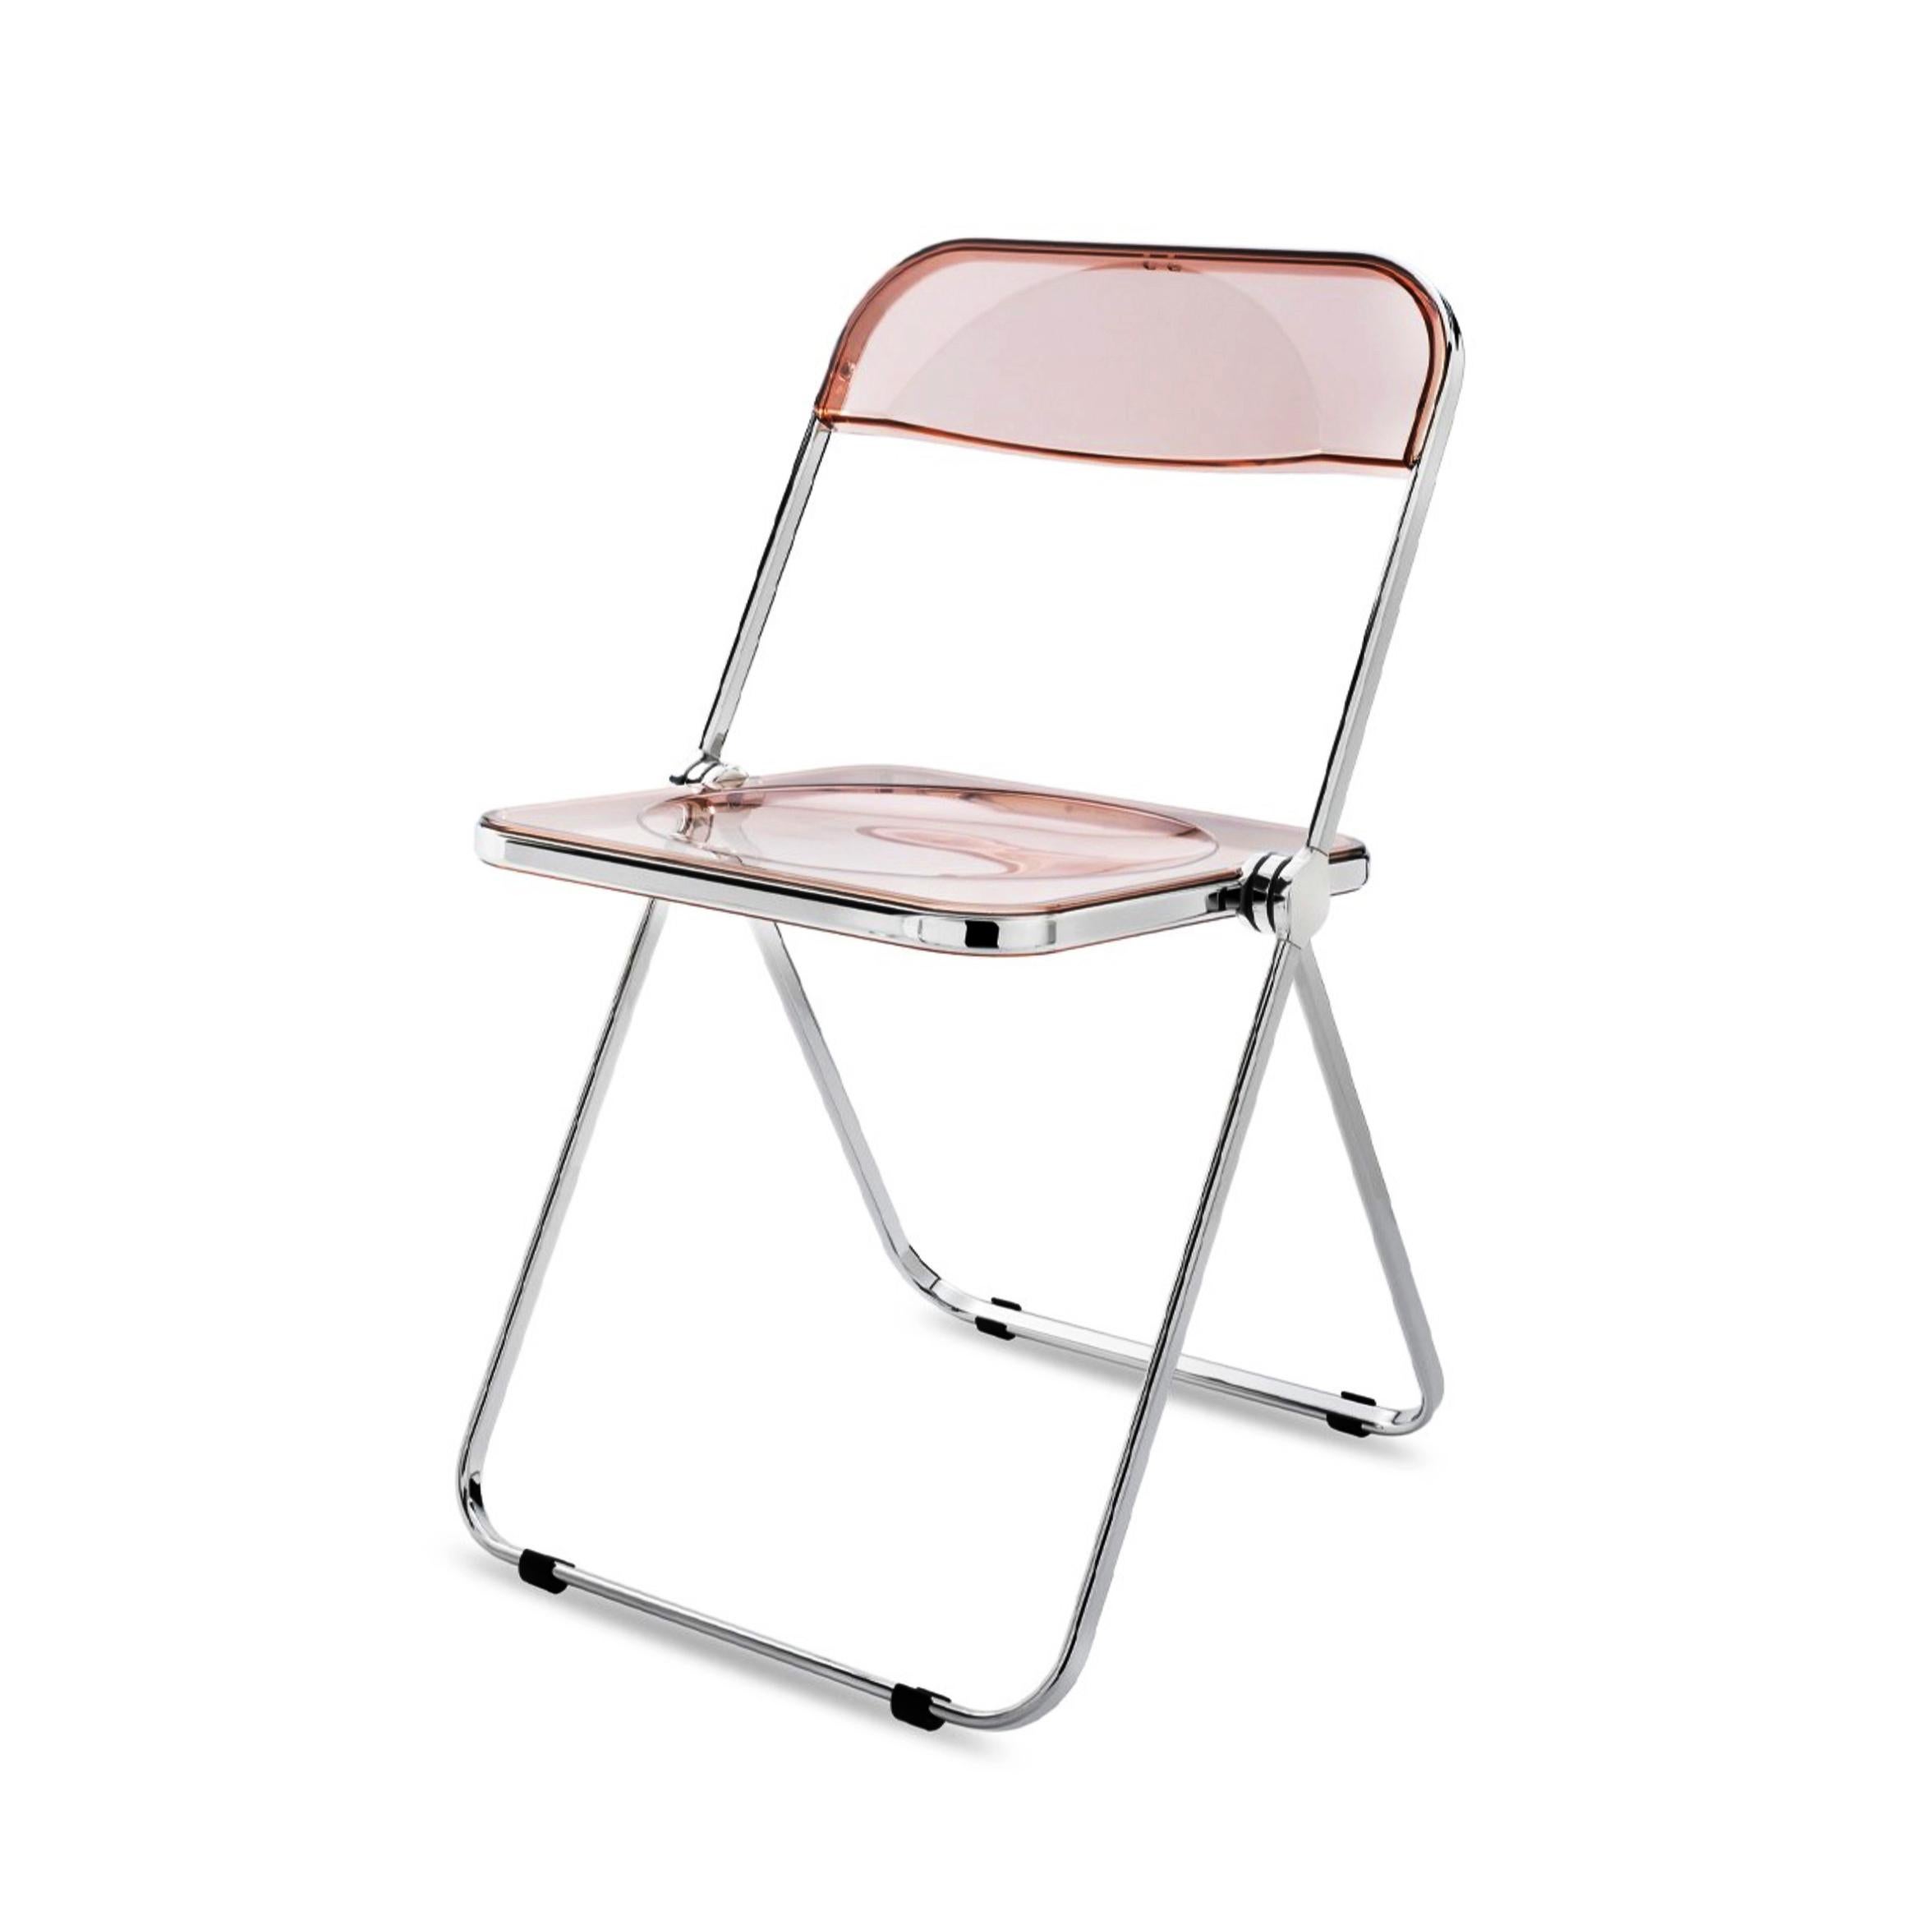 Aluminum Set of 6 Lucite Pink and Chrome Plia Chairs, Piretti for Castelli, Italy 1970s For Sale